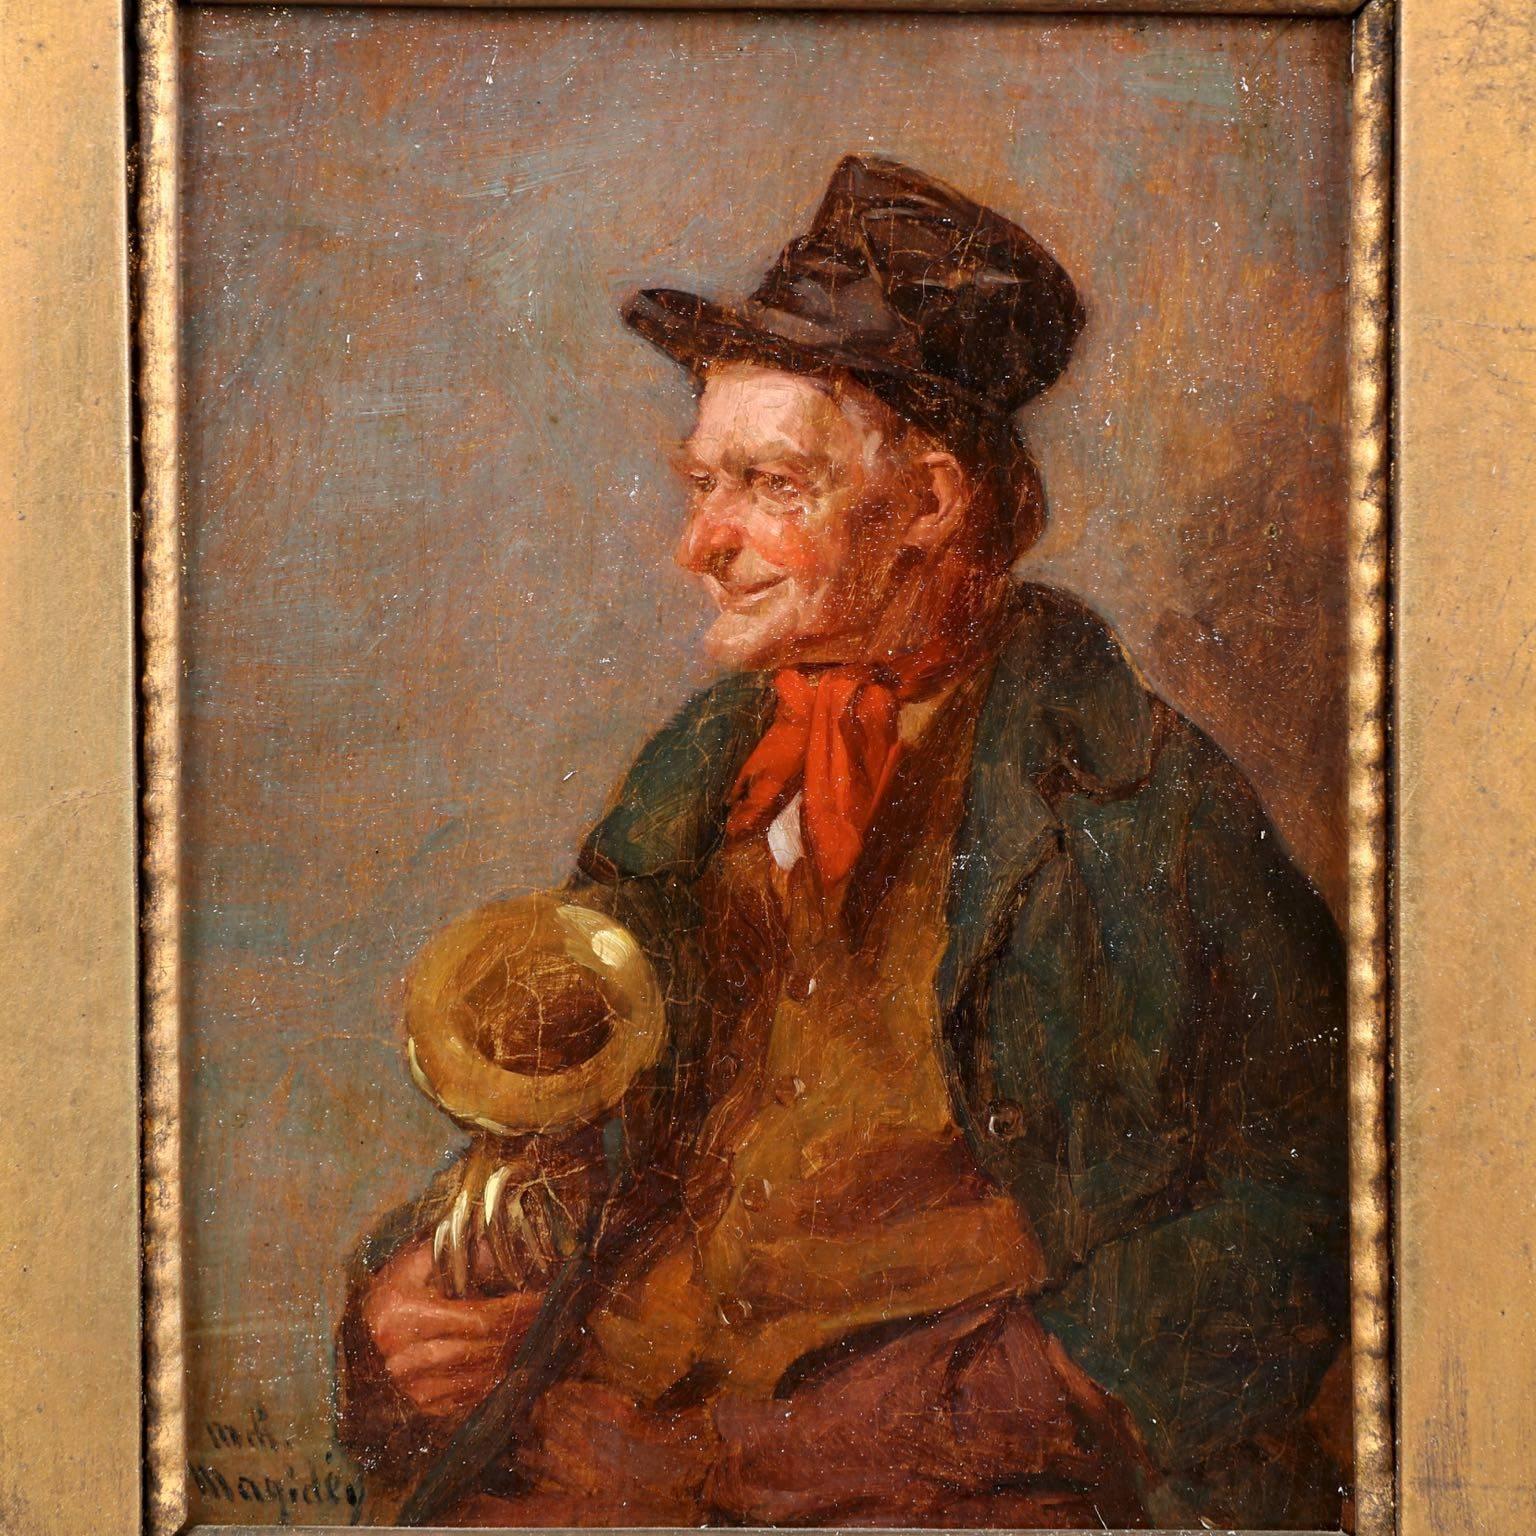 A remarkably charming little work by German artist Wladimir Maguey, this fine oil on panel captures a side profile of a musician with his brass horn.  His weathered skin and rumpled clothing speak of a musician who must play to survive, and yet his